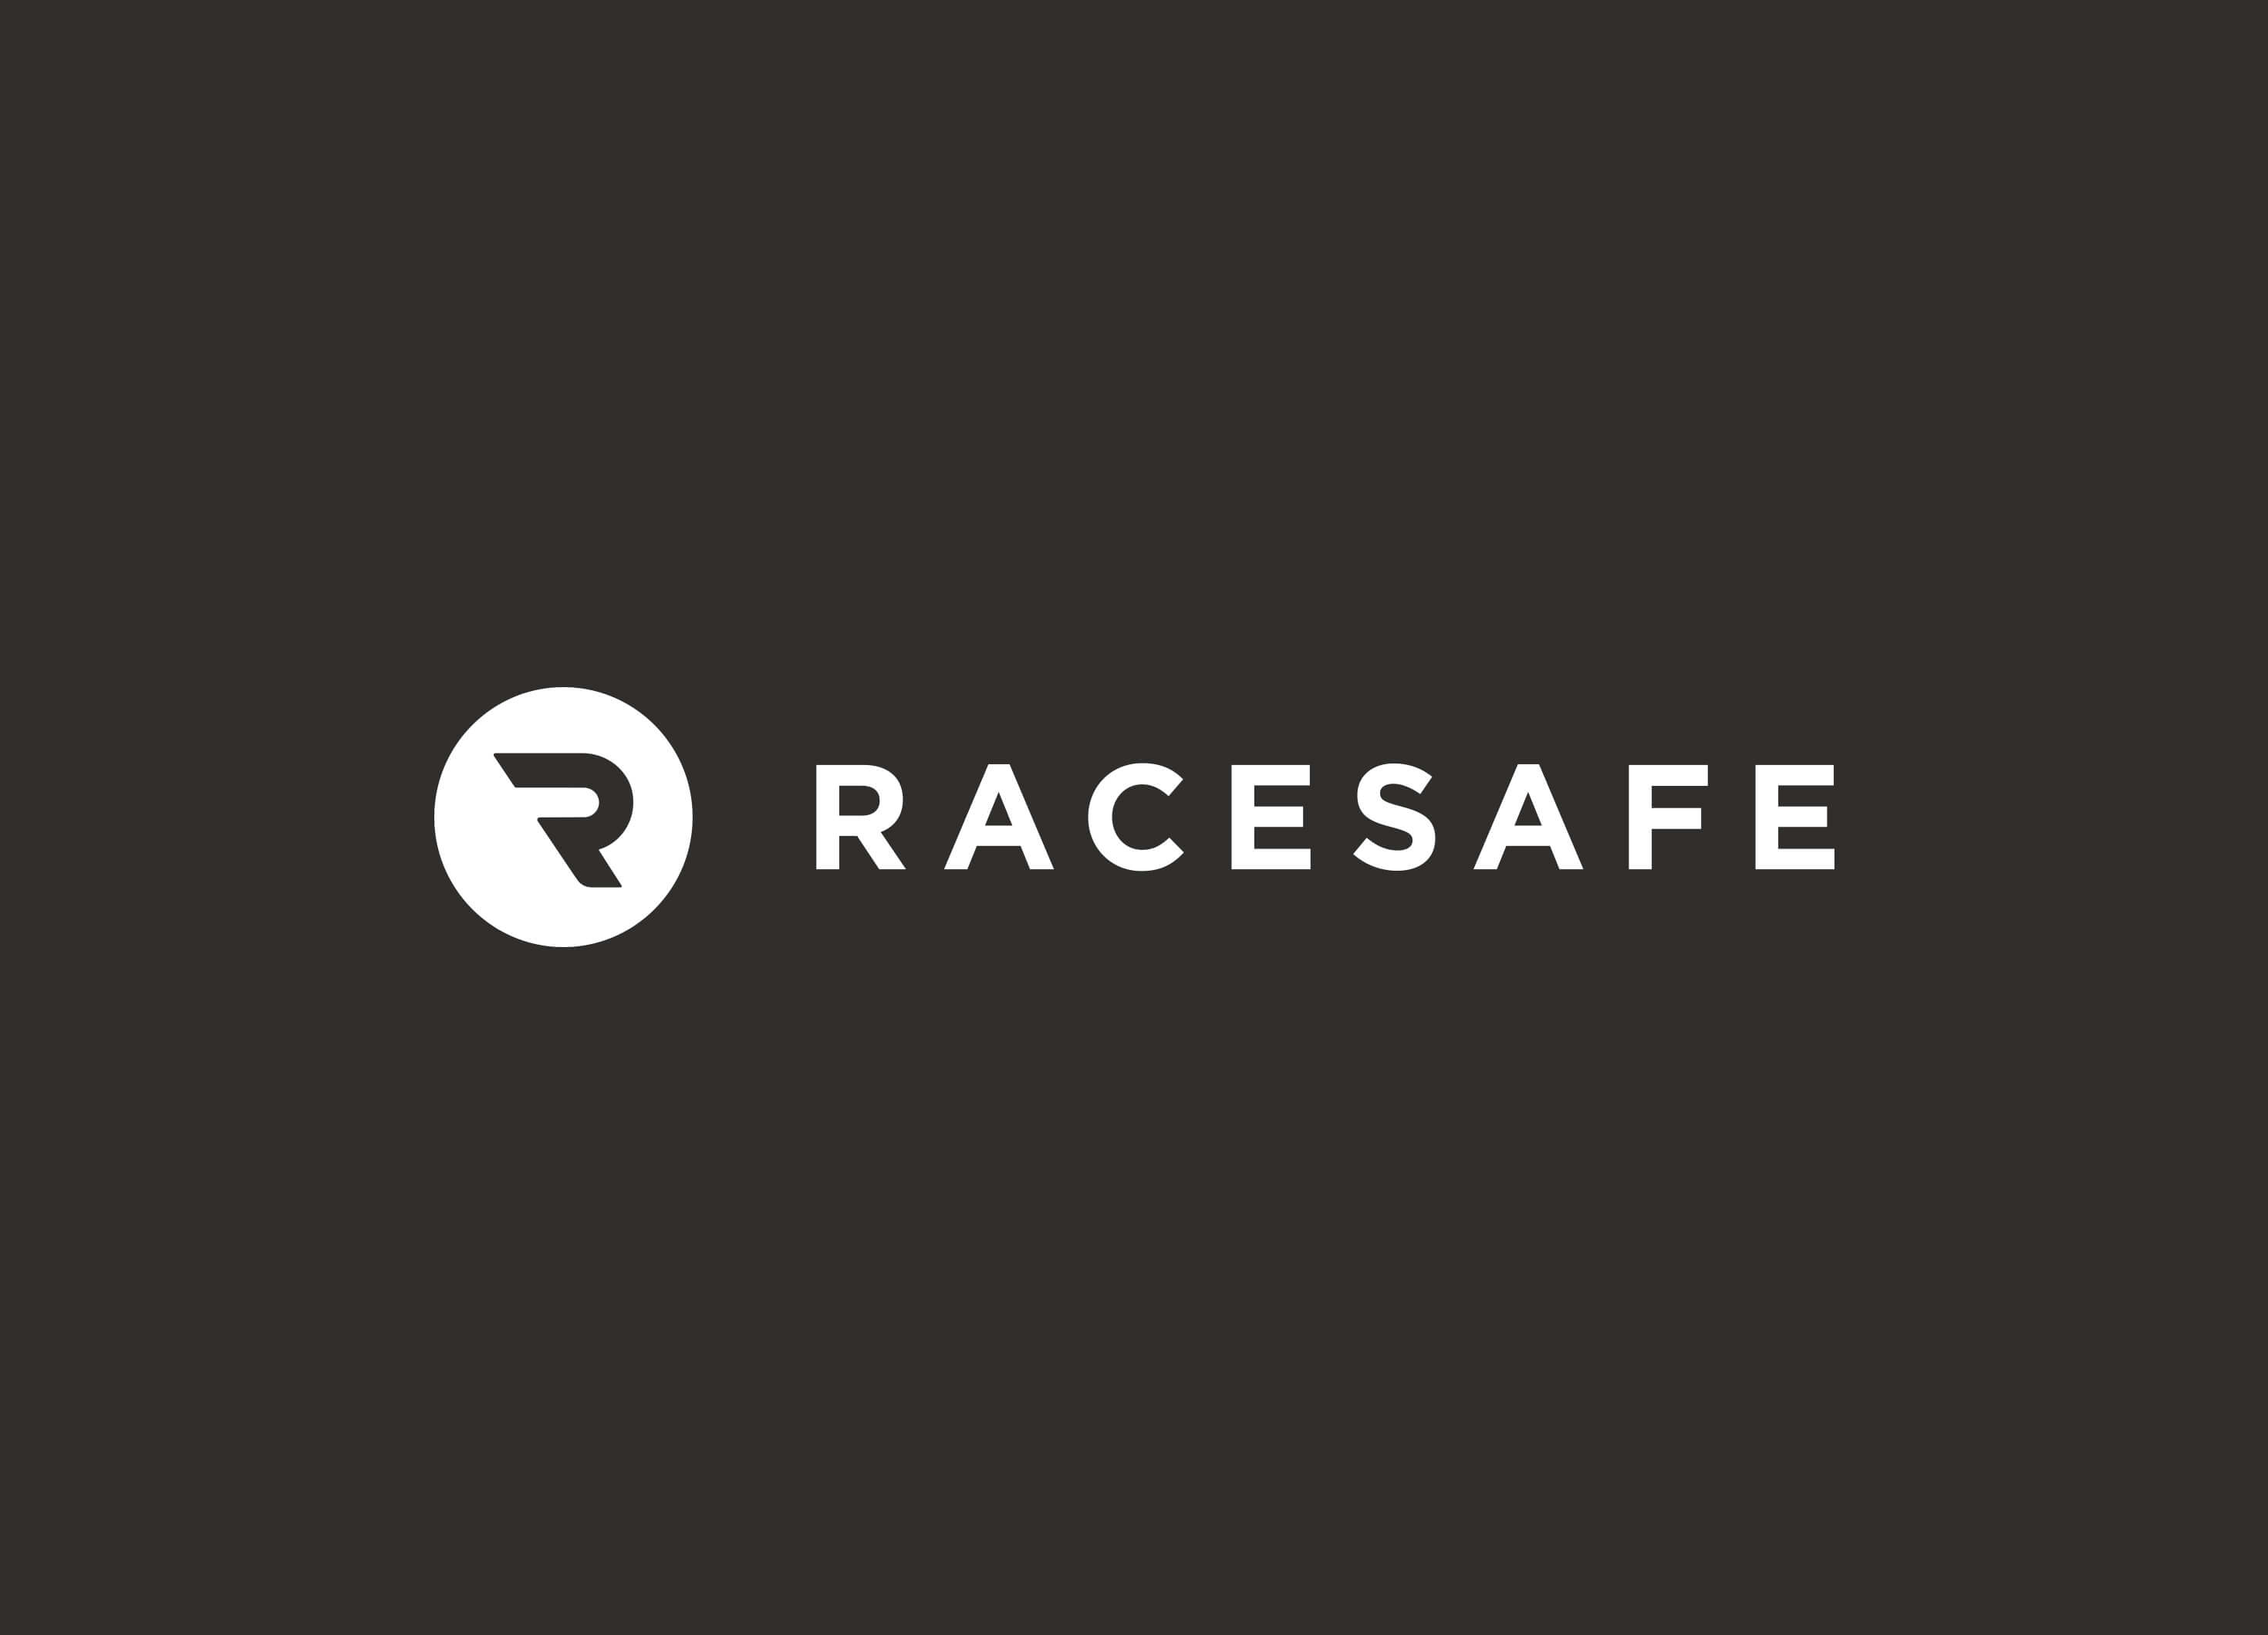 Primary brand logo for Racesafe